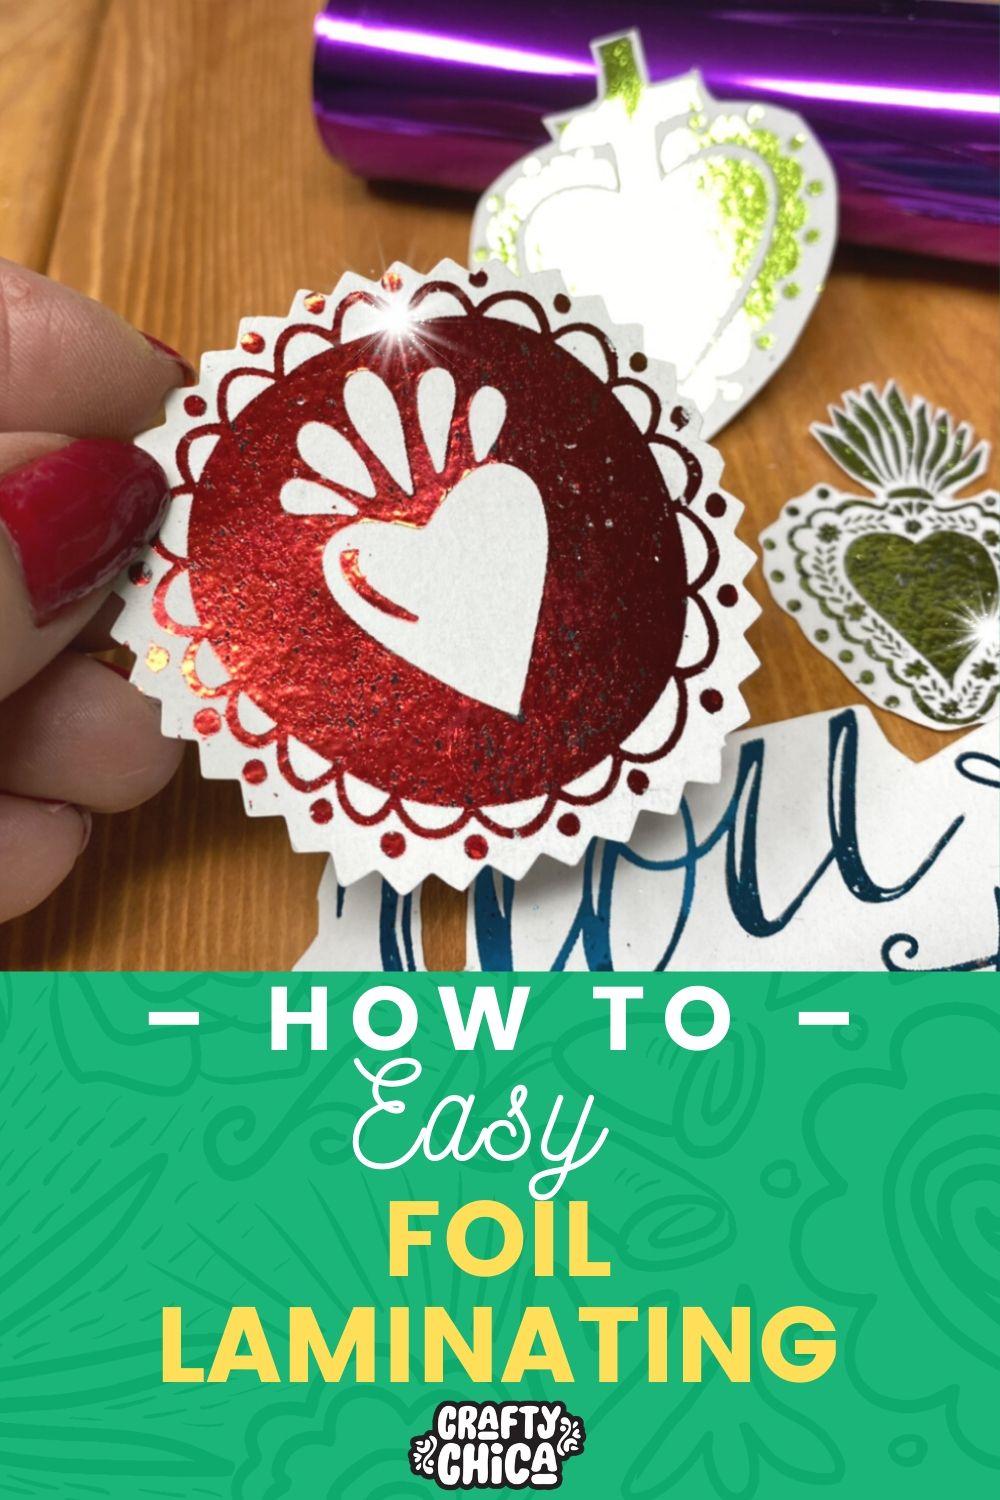 Your guide for easy foil laminating! #craftychica #foillaminating